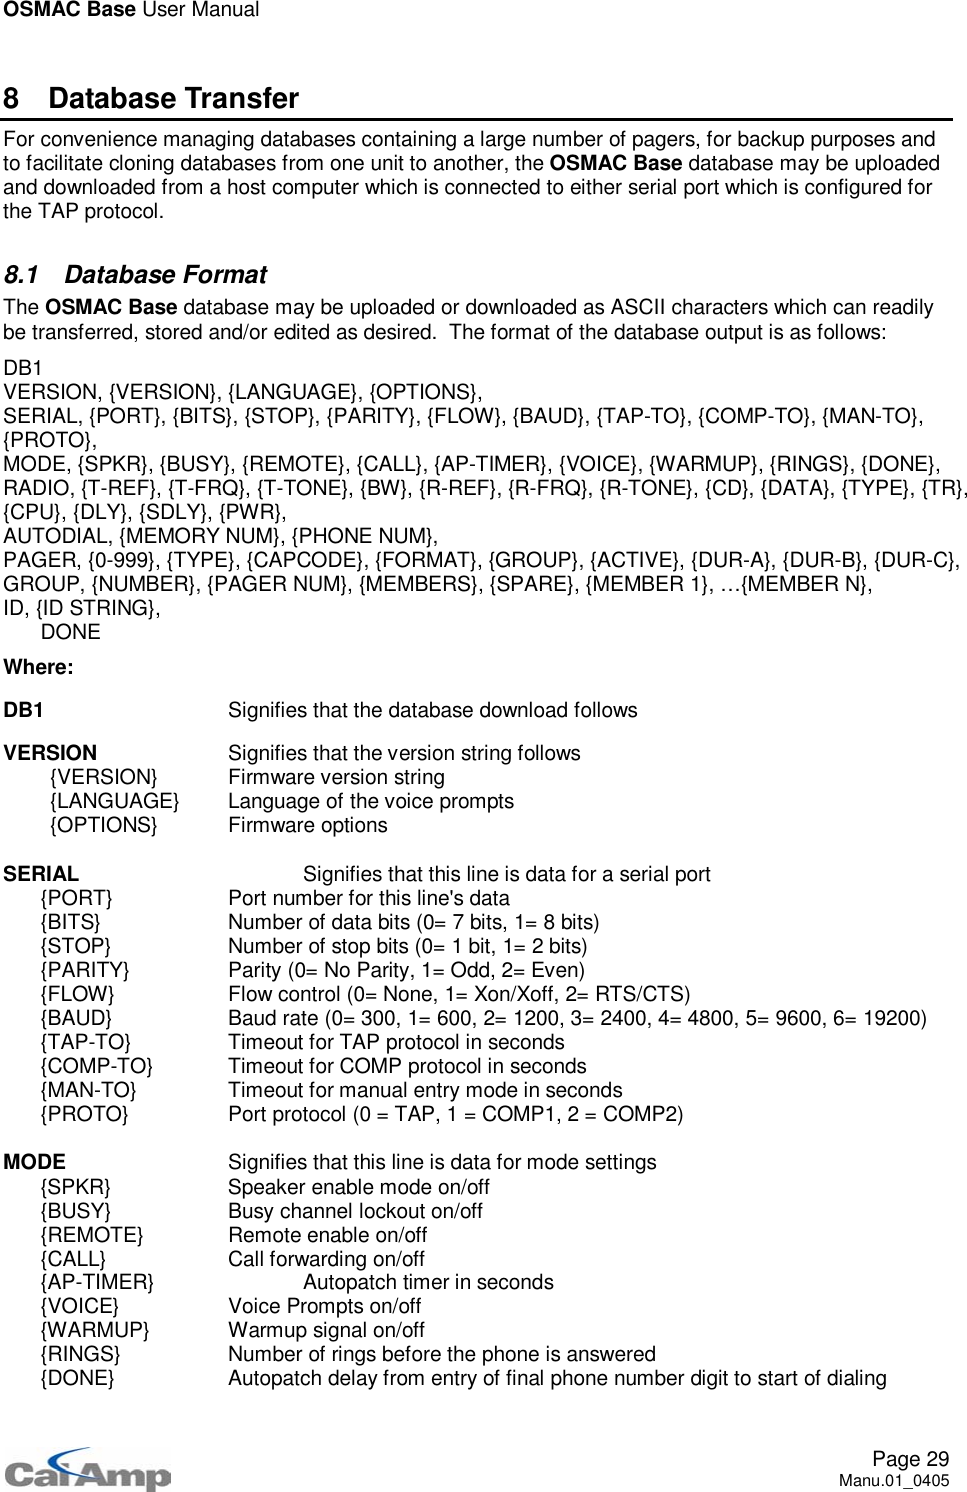 OSMAC Base User ManualPage 29Manu.01_04058 Database TransferFor convenience managing databases containing a large number of pagers, for backup purposes andto facilitate cloning databases from one unit to another, the OSMAC Base database may be uploadedand downloaded from a host computer which is connected to either serial port which is configured forthe TAP protocol.8.1 Database FormatThe OSMAC Base database may be uploaded or downloaded as ASCII characters which can readilybe transferred, stored and/or edited as desired. The format of the database output is as follows:DB1VERSION, {VERSION}, {LANGUAGE}, {OPTIONS},SERIAL, {PORT}, {BITS}, {STOP}, {PARITY}, {FLOW}, {BAUD}, {TAP-TO}, {COMP-TO}, {MAN-TO},{PROTO},MODE, {SPKR}, {BUSY}, {REMOTE}, {CALL}, {AP-TIMER}, {VOICE}, {WARMUP}, {RINGS}, {DONE},RADIO, {T-REF}, {T-FRQ}, {T-TONE}, {BW}, {R-REF}, {R-FRQ}, {R-TONE}, {CD}, {DATA}, {TYPE}, {TR},{CPU}, {DLY}, {SDLY}, {PWR},AUTODIAL, {MEMORY NUM}, {PHONE NUM},PAGER, {0-999}, {TYPE}, {CAPCODE}, {FORMAT}, {GROUP}, {ACTIVE}, {DUR-A}, {DUR-B}, {DUR-C},GROUP, {NUMBER}, {PAGER NUM}, {MEMBERS}, {SPARE}, {MEMBER 1}, …{MEMBER N},ID, {ID STRING},DONEWhere:DB1 Signifies that the database download followsVERSION Signifies that the version string follows{VERSION} Firmware version string{LANGUAGE} Language of the voice prompts{OPTIONS} Firmware optionsSERIAL Signifies that this line is data for a serial port{PORT} Port number for this line&apos;s data{BITS} Number of data bits (0= 7 bits, 1= 8 bits){STOP} Number of stop bits (0= 1 bit, 1= 2 bits){PARITY} Parity (0= No Parity, 1= Odd, 2= Even){FLOW} Flow control (0= None, 1= Xon/Xoff, 2= RTS/CTS){BAUD} Baud rate (0= 300, 1= 600, 2= 1200, 3= 2400, 4= 4800, 5= 9600, 6= 19200){TAP-TO} Timeout for TAP protocol in seconds{COMP-TO} Timeout for COMP protocol in seconds{MAN-TO} Timeout for manual entry mode in seconds{PROTO} Port protocol (0 = TAP, 1 = COMP1, 2 = COMP2)MODE Signifies that this line is data for mode settings{SPKR} Speaker enable mode on/off{BUSY} Busy channel lockout on/off{REMOTE} Remote enable on/off{CALL} Call forwarding on/off{AP-TIMER} Autopatch timer in seconds{VOICE} Voice Prompts on/off{WARMUP} Warmup signal on/off{RINGS} Number of rings before the phone is answered{DONE} Autopatch delay from entry of final phone number digit to start of dialing